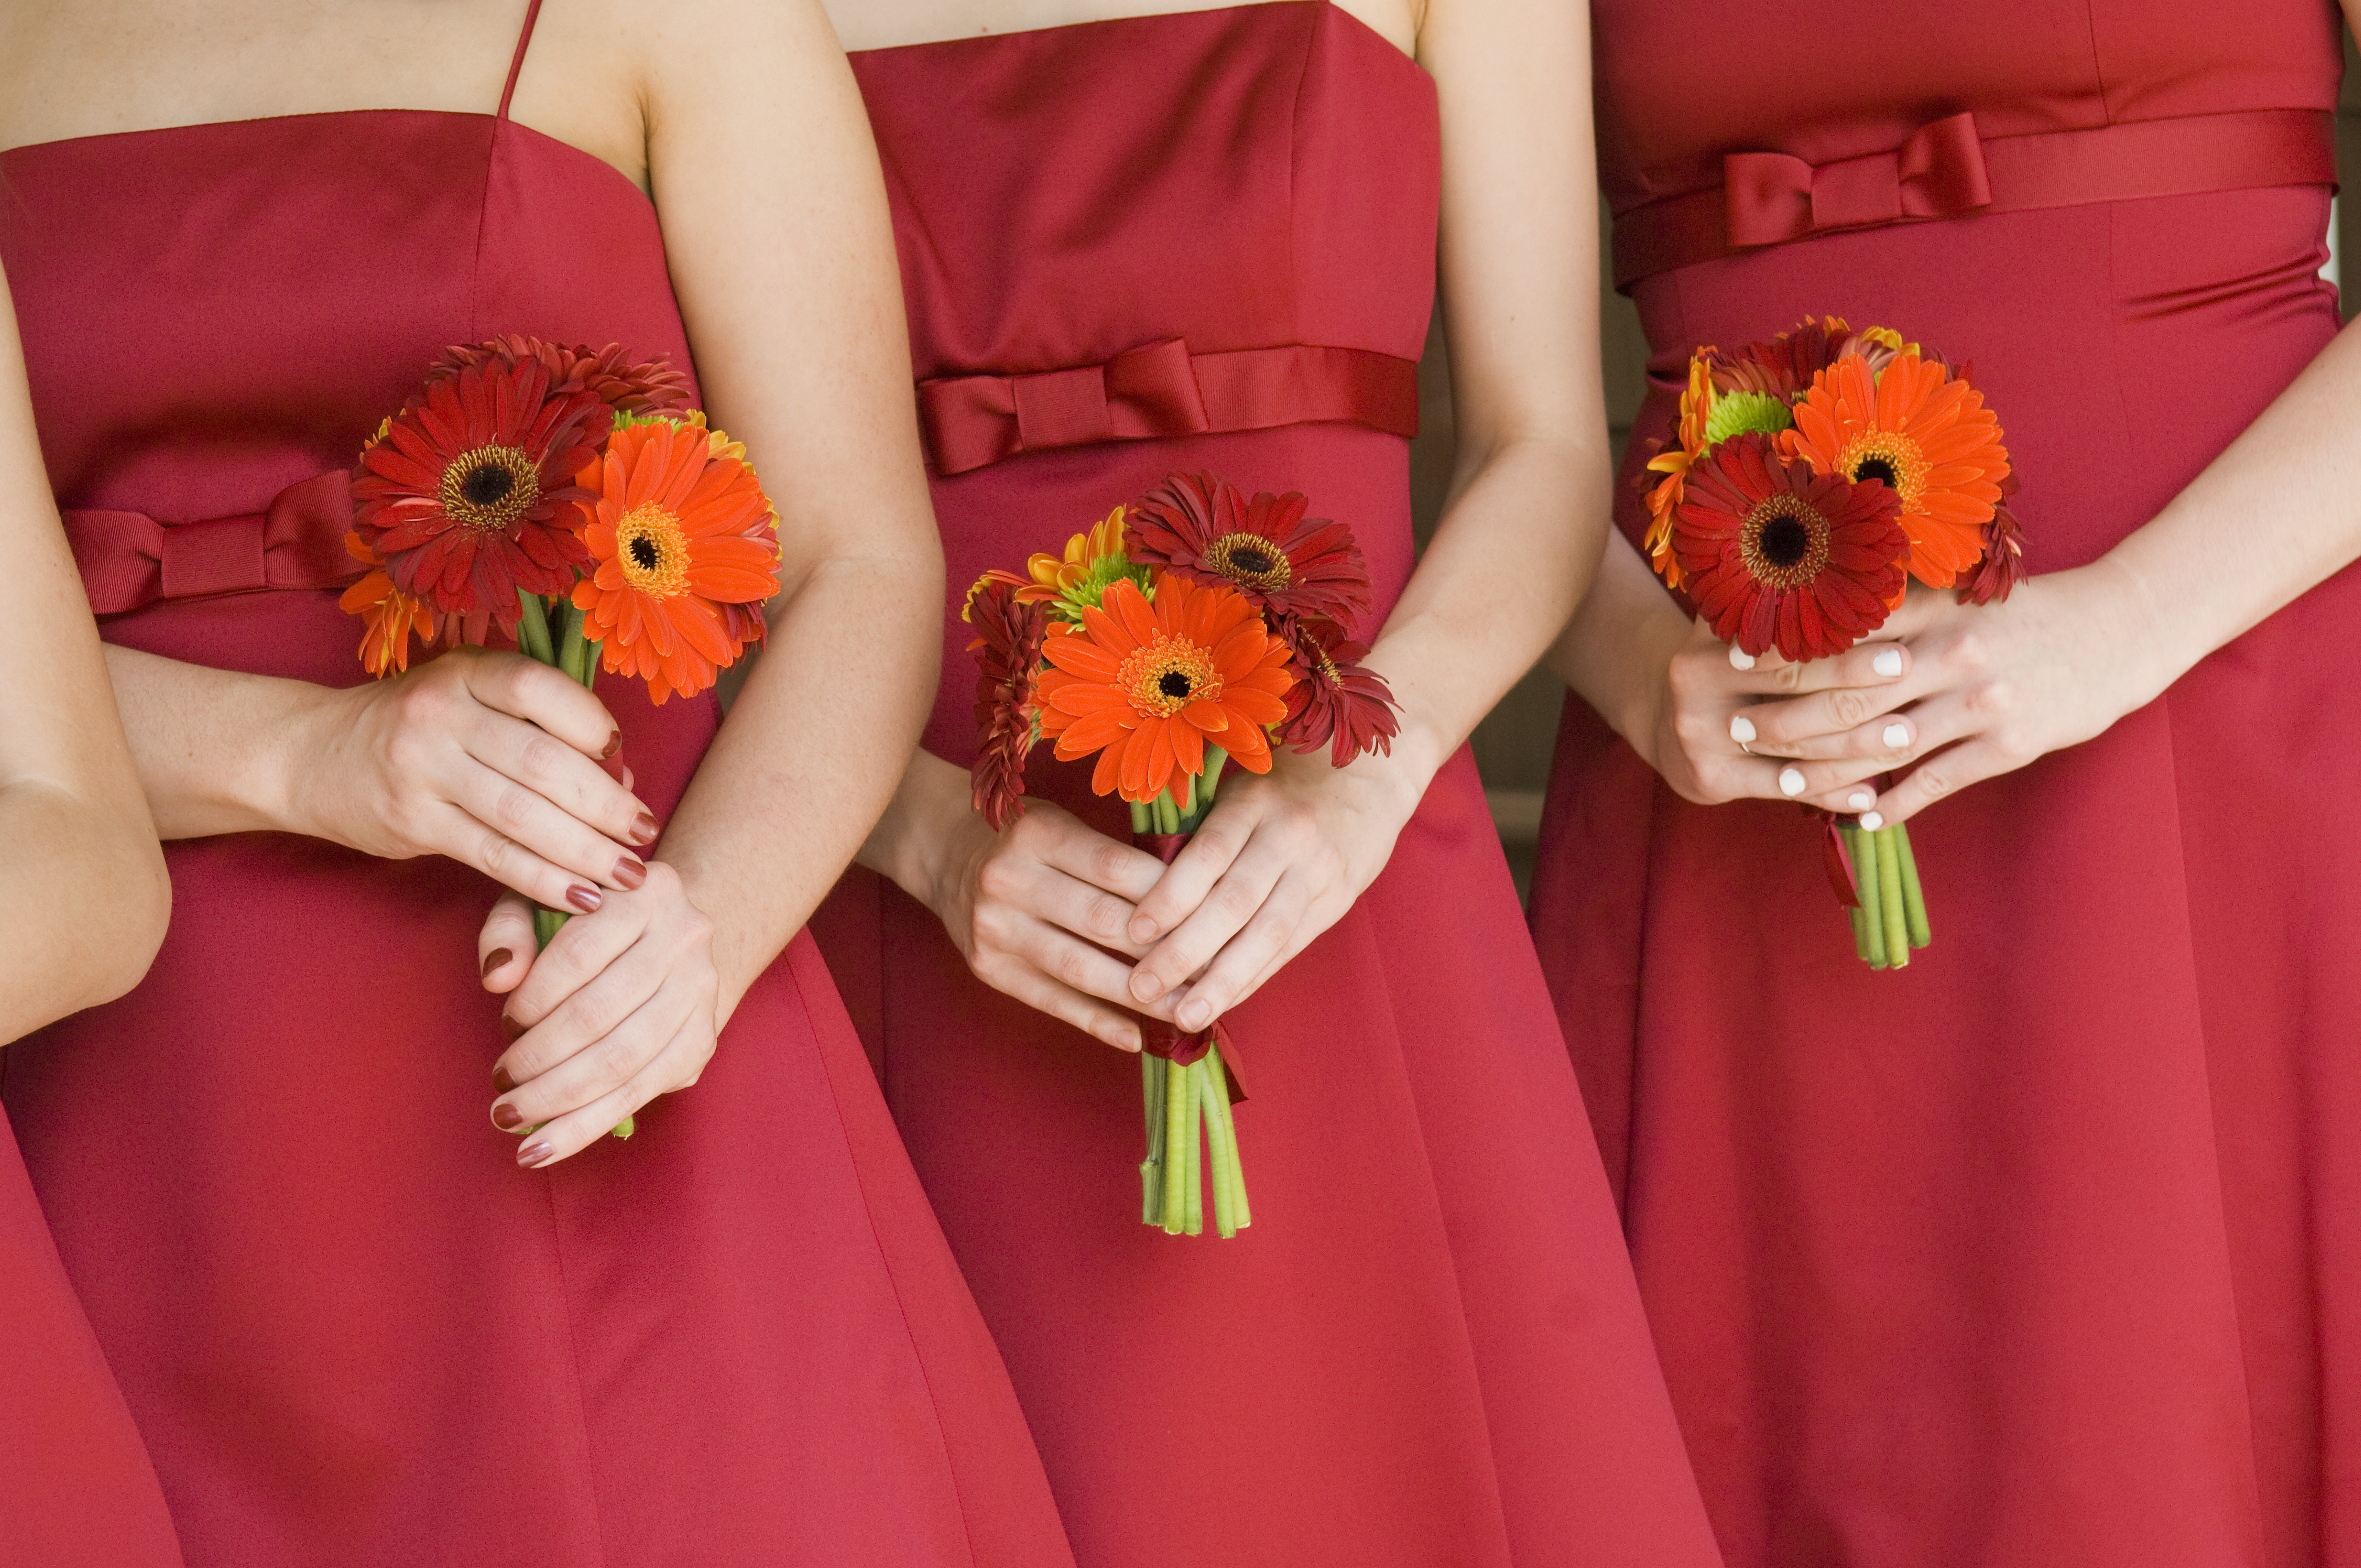 Bridesmaids in red dresses holding bouquets of Gerber daisies. | Source: Getty Images